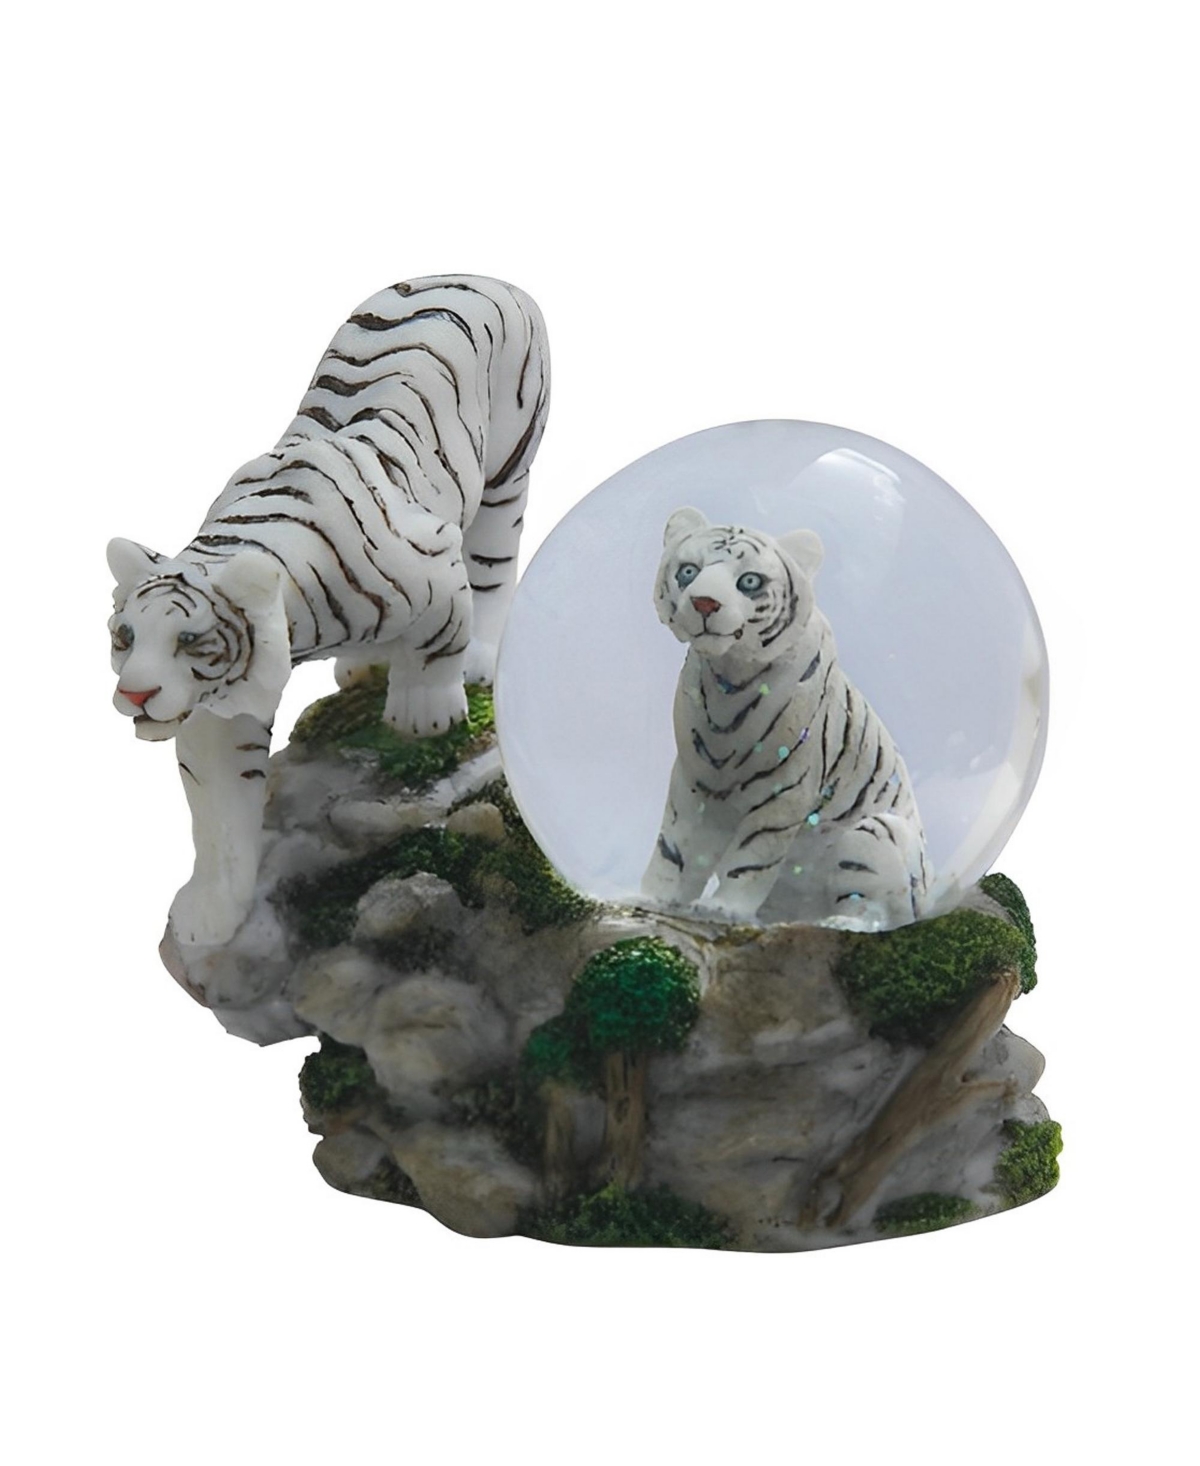 4"H White Tiger with Cub Glitter Snow Globe Home Decor Perfect Gift for House Warming, Holidays and Birthdays - Multicolor